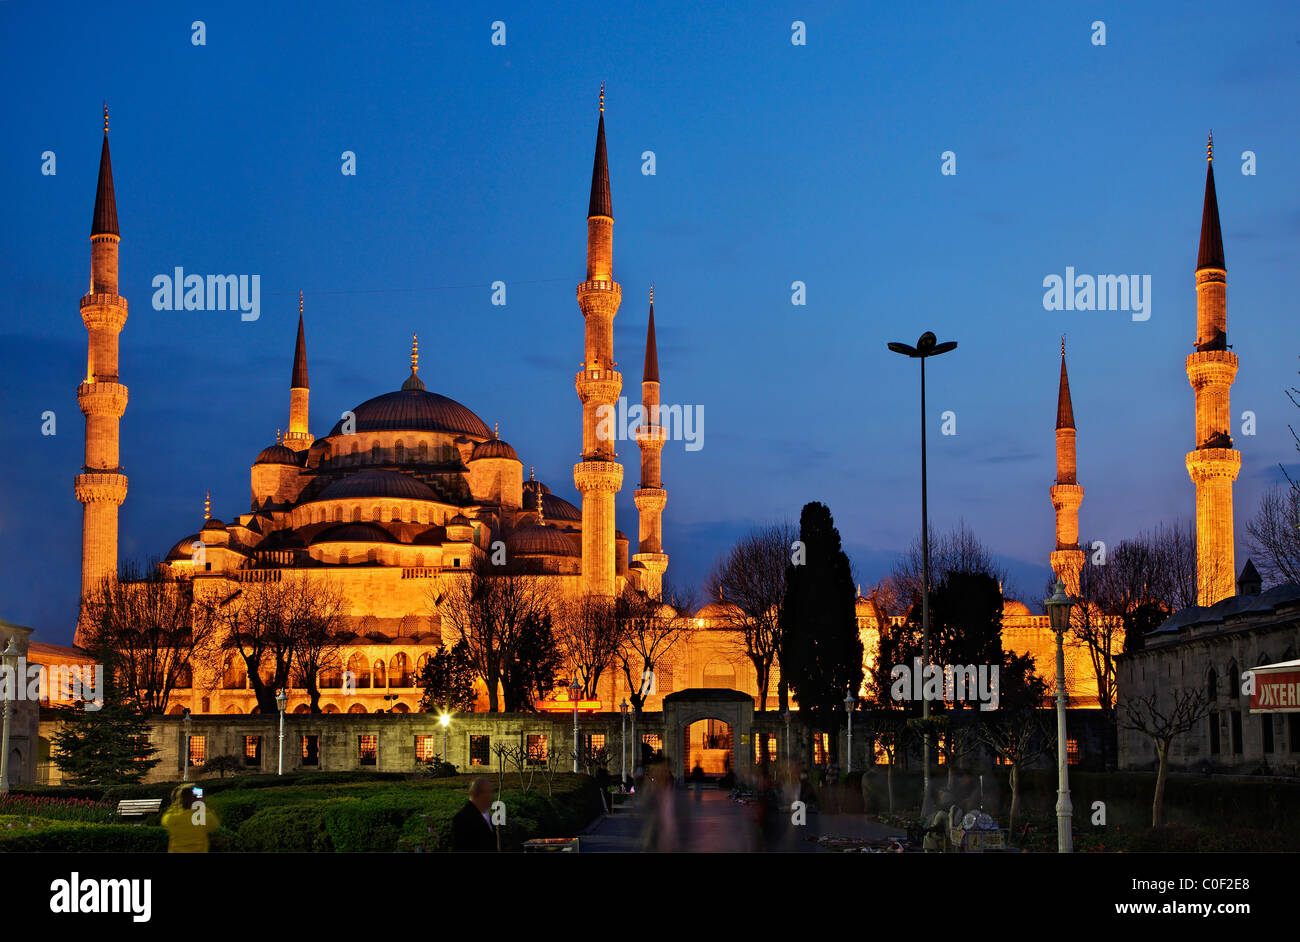 Night view of the Blue Mosque (Sultanahmet Camii) with its 6 minarets from the side of Hagia Sophia Stock Photo